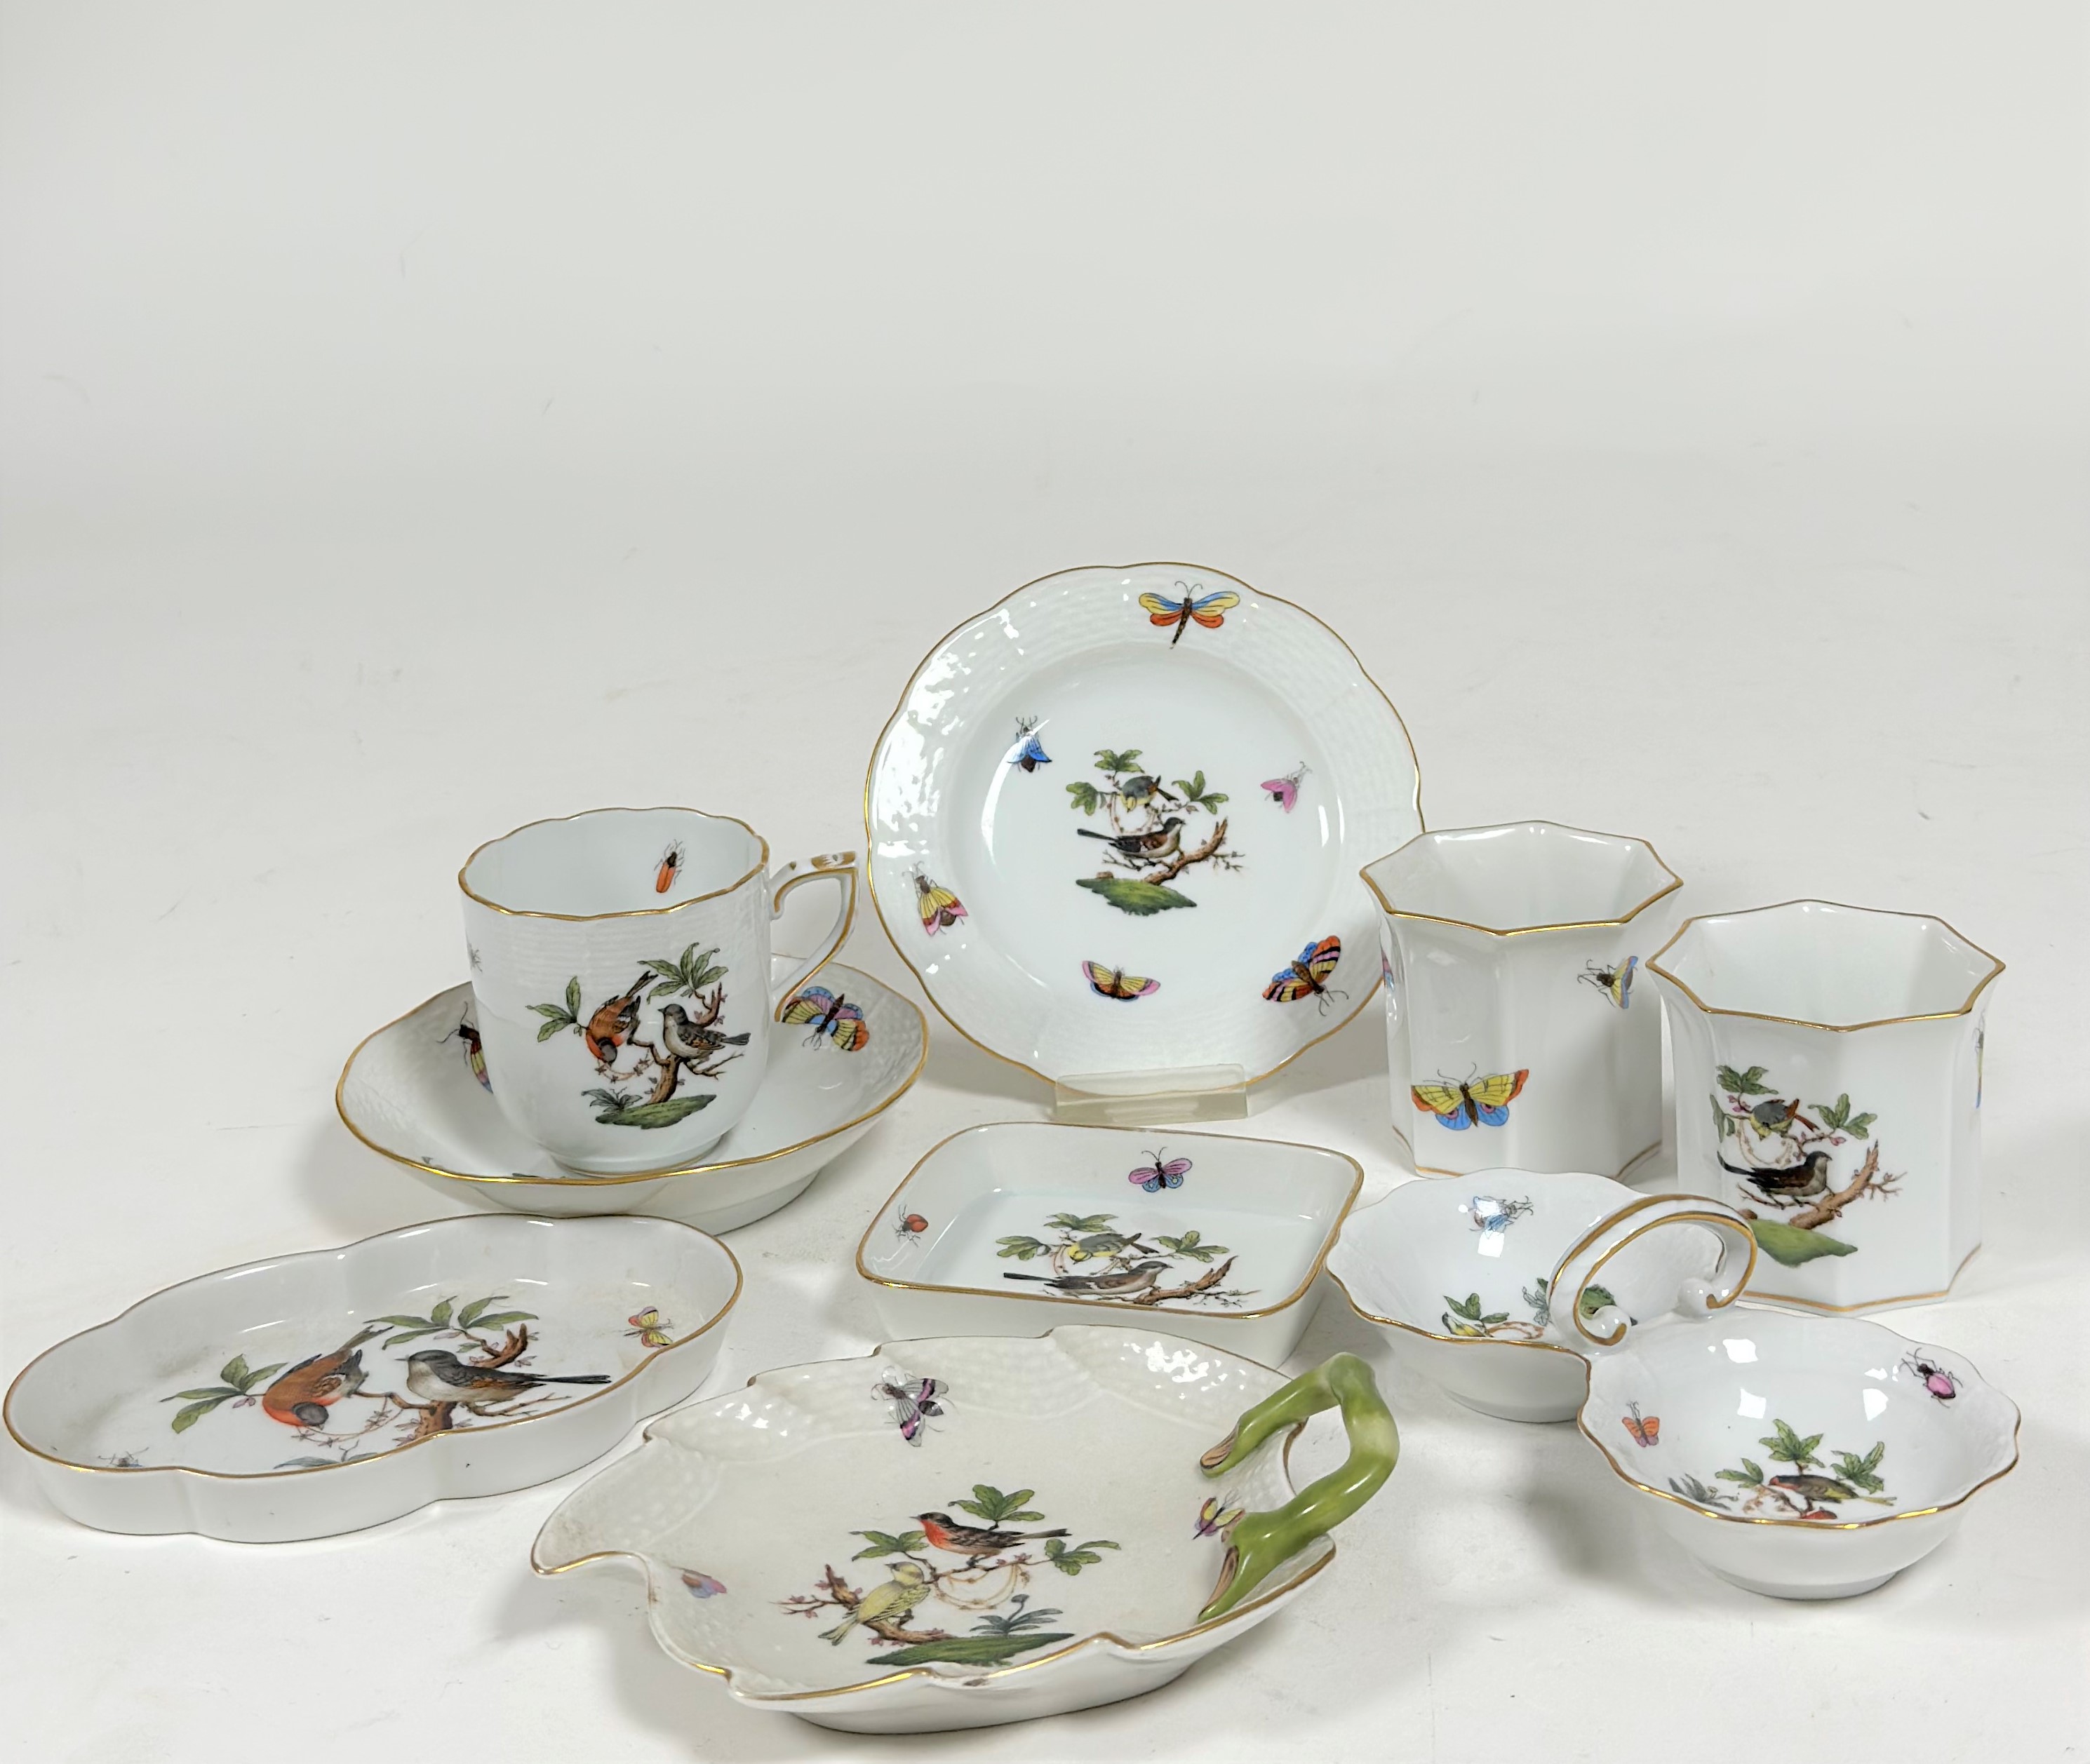 A group of Herend porcelain in the Rothschild Bird pattern comprising: a leaf-shaped dish; a twin